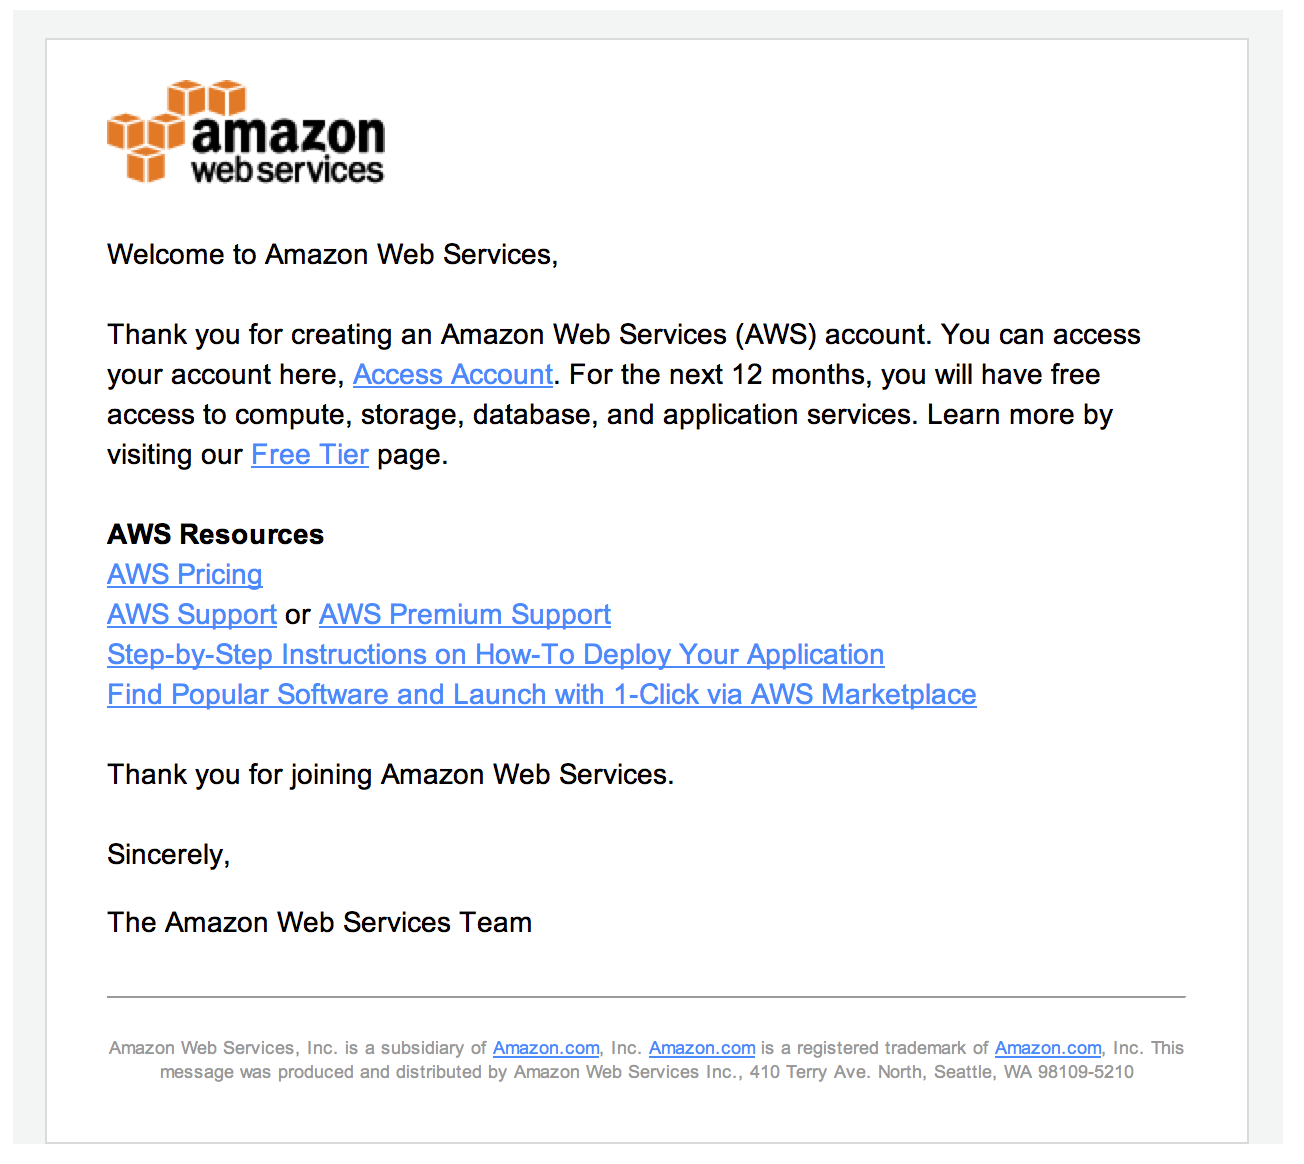 AmazonWebServices_09_Confirmation_email.png